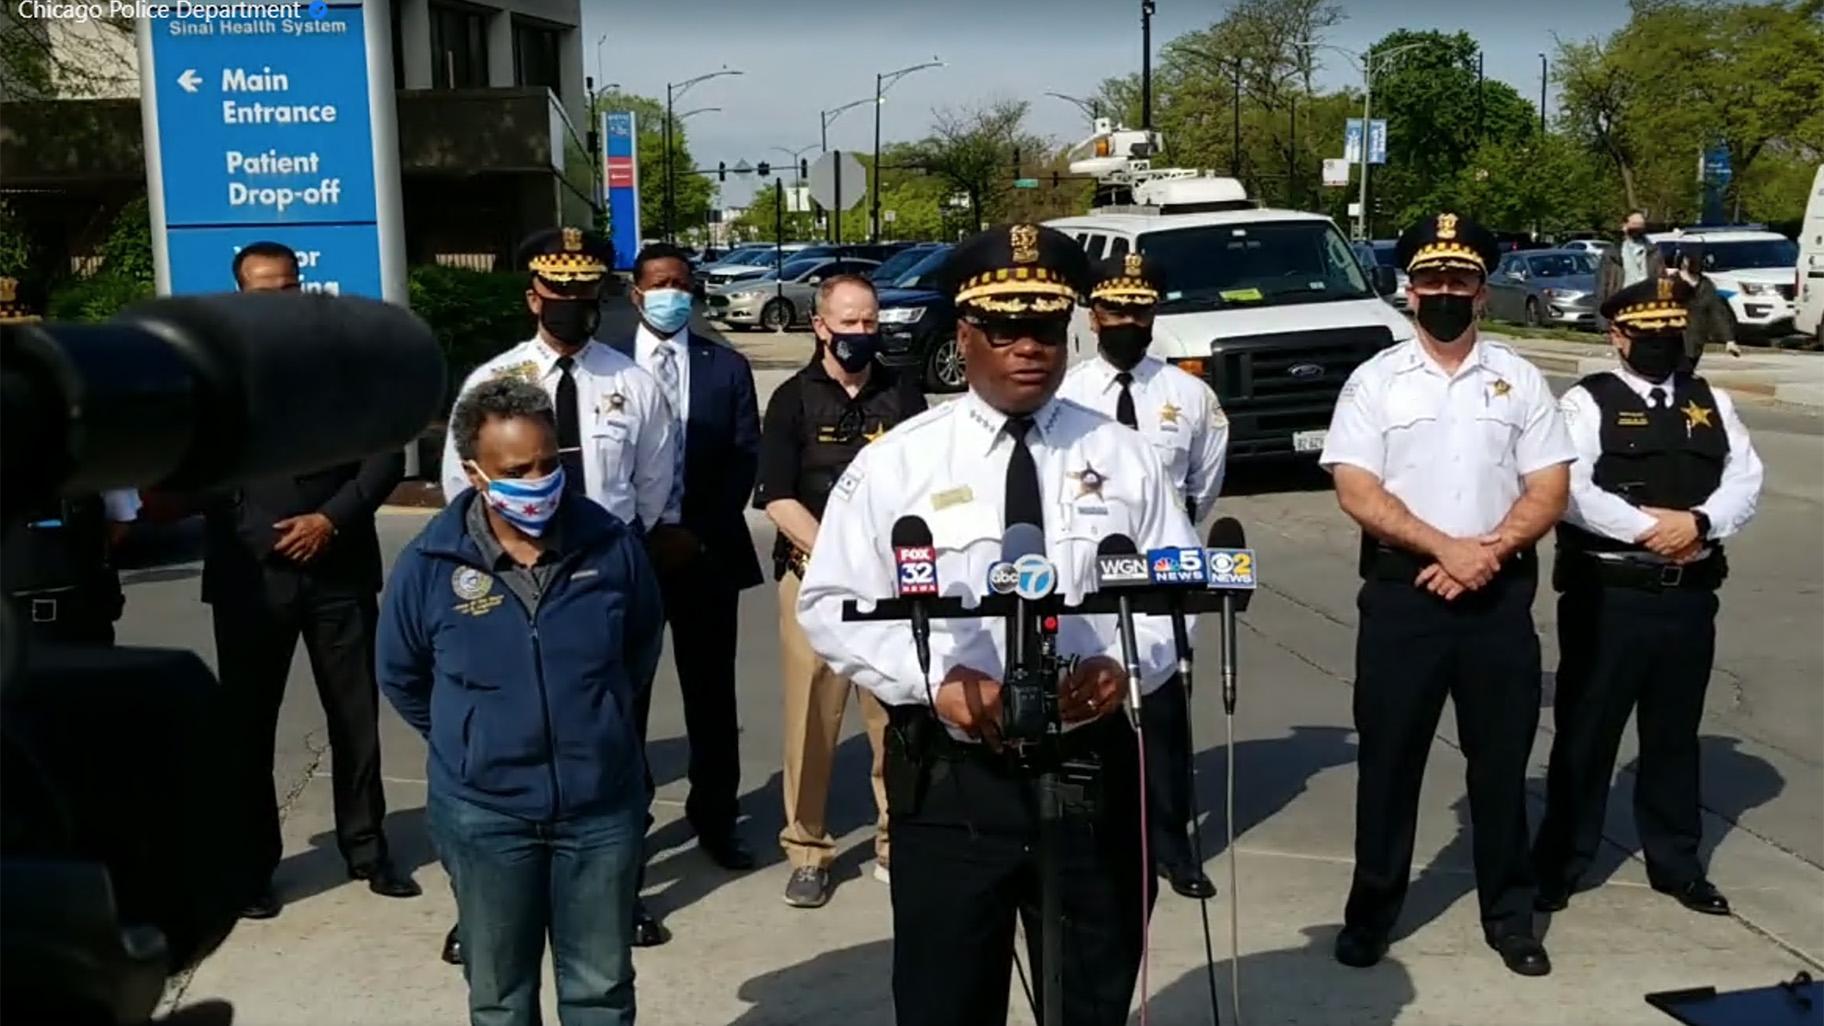 In this image taken from video, Chicago police Superintendent David Brown is joined by Mayor Lori Lightfoot to speak about two officers shot earlier Sunday, May 16, 2021. (Chicago Police Department / Facebook)